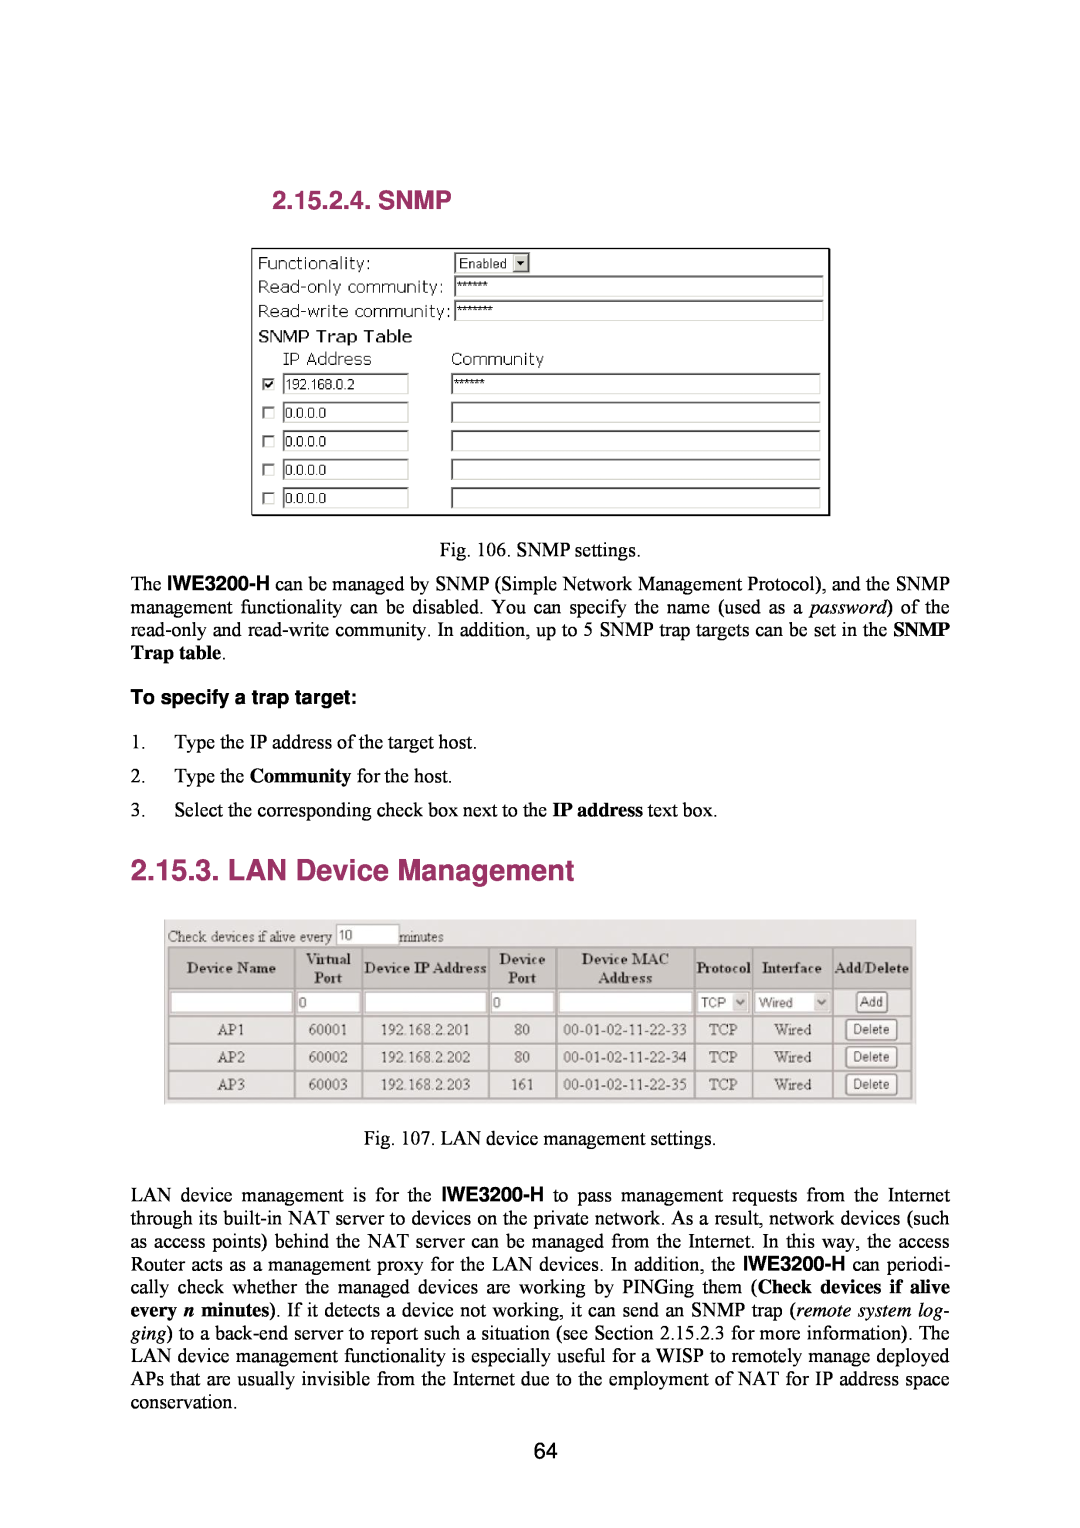 Epson IWE3200-H manual LAN Device Management, Snmp, To specify a trap target 